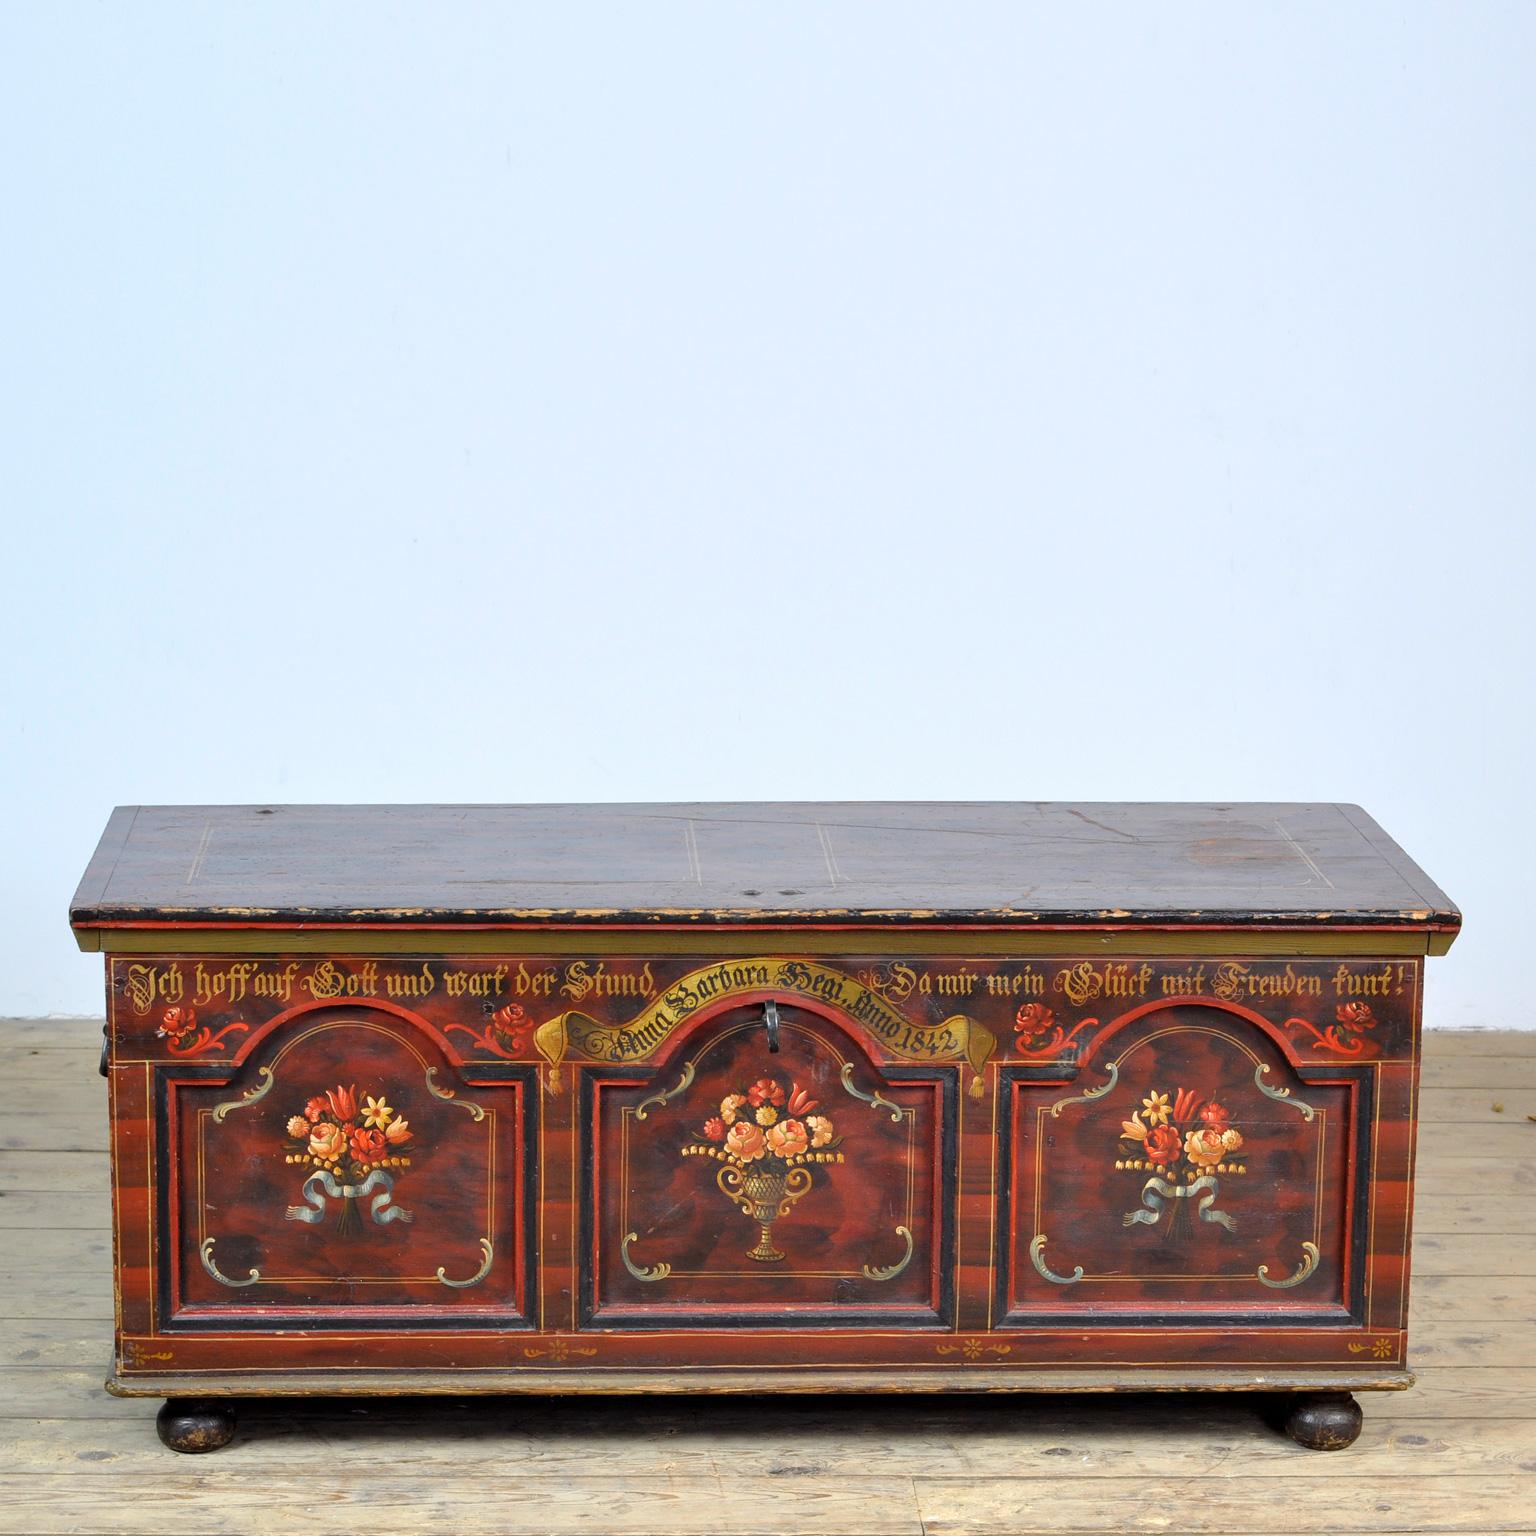 Picturesque German dowry chest made for one Anna Barbara Hegi in 1842. These chests were typically part of a young woman's dowry, filled with her linens and silver to move into her new home after marriage. details. The beautiful hand-forged iron